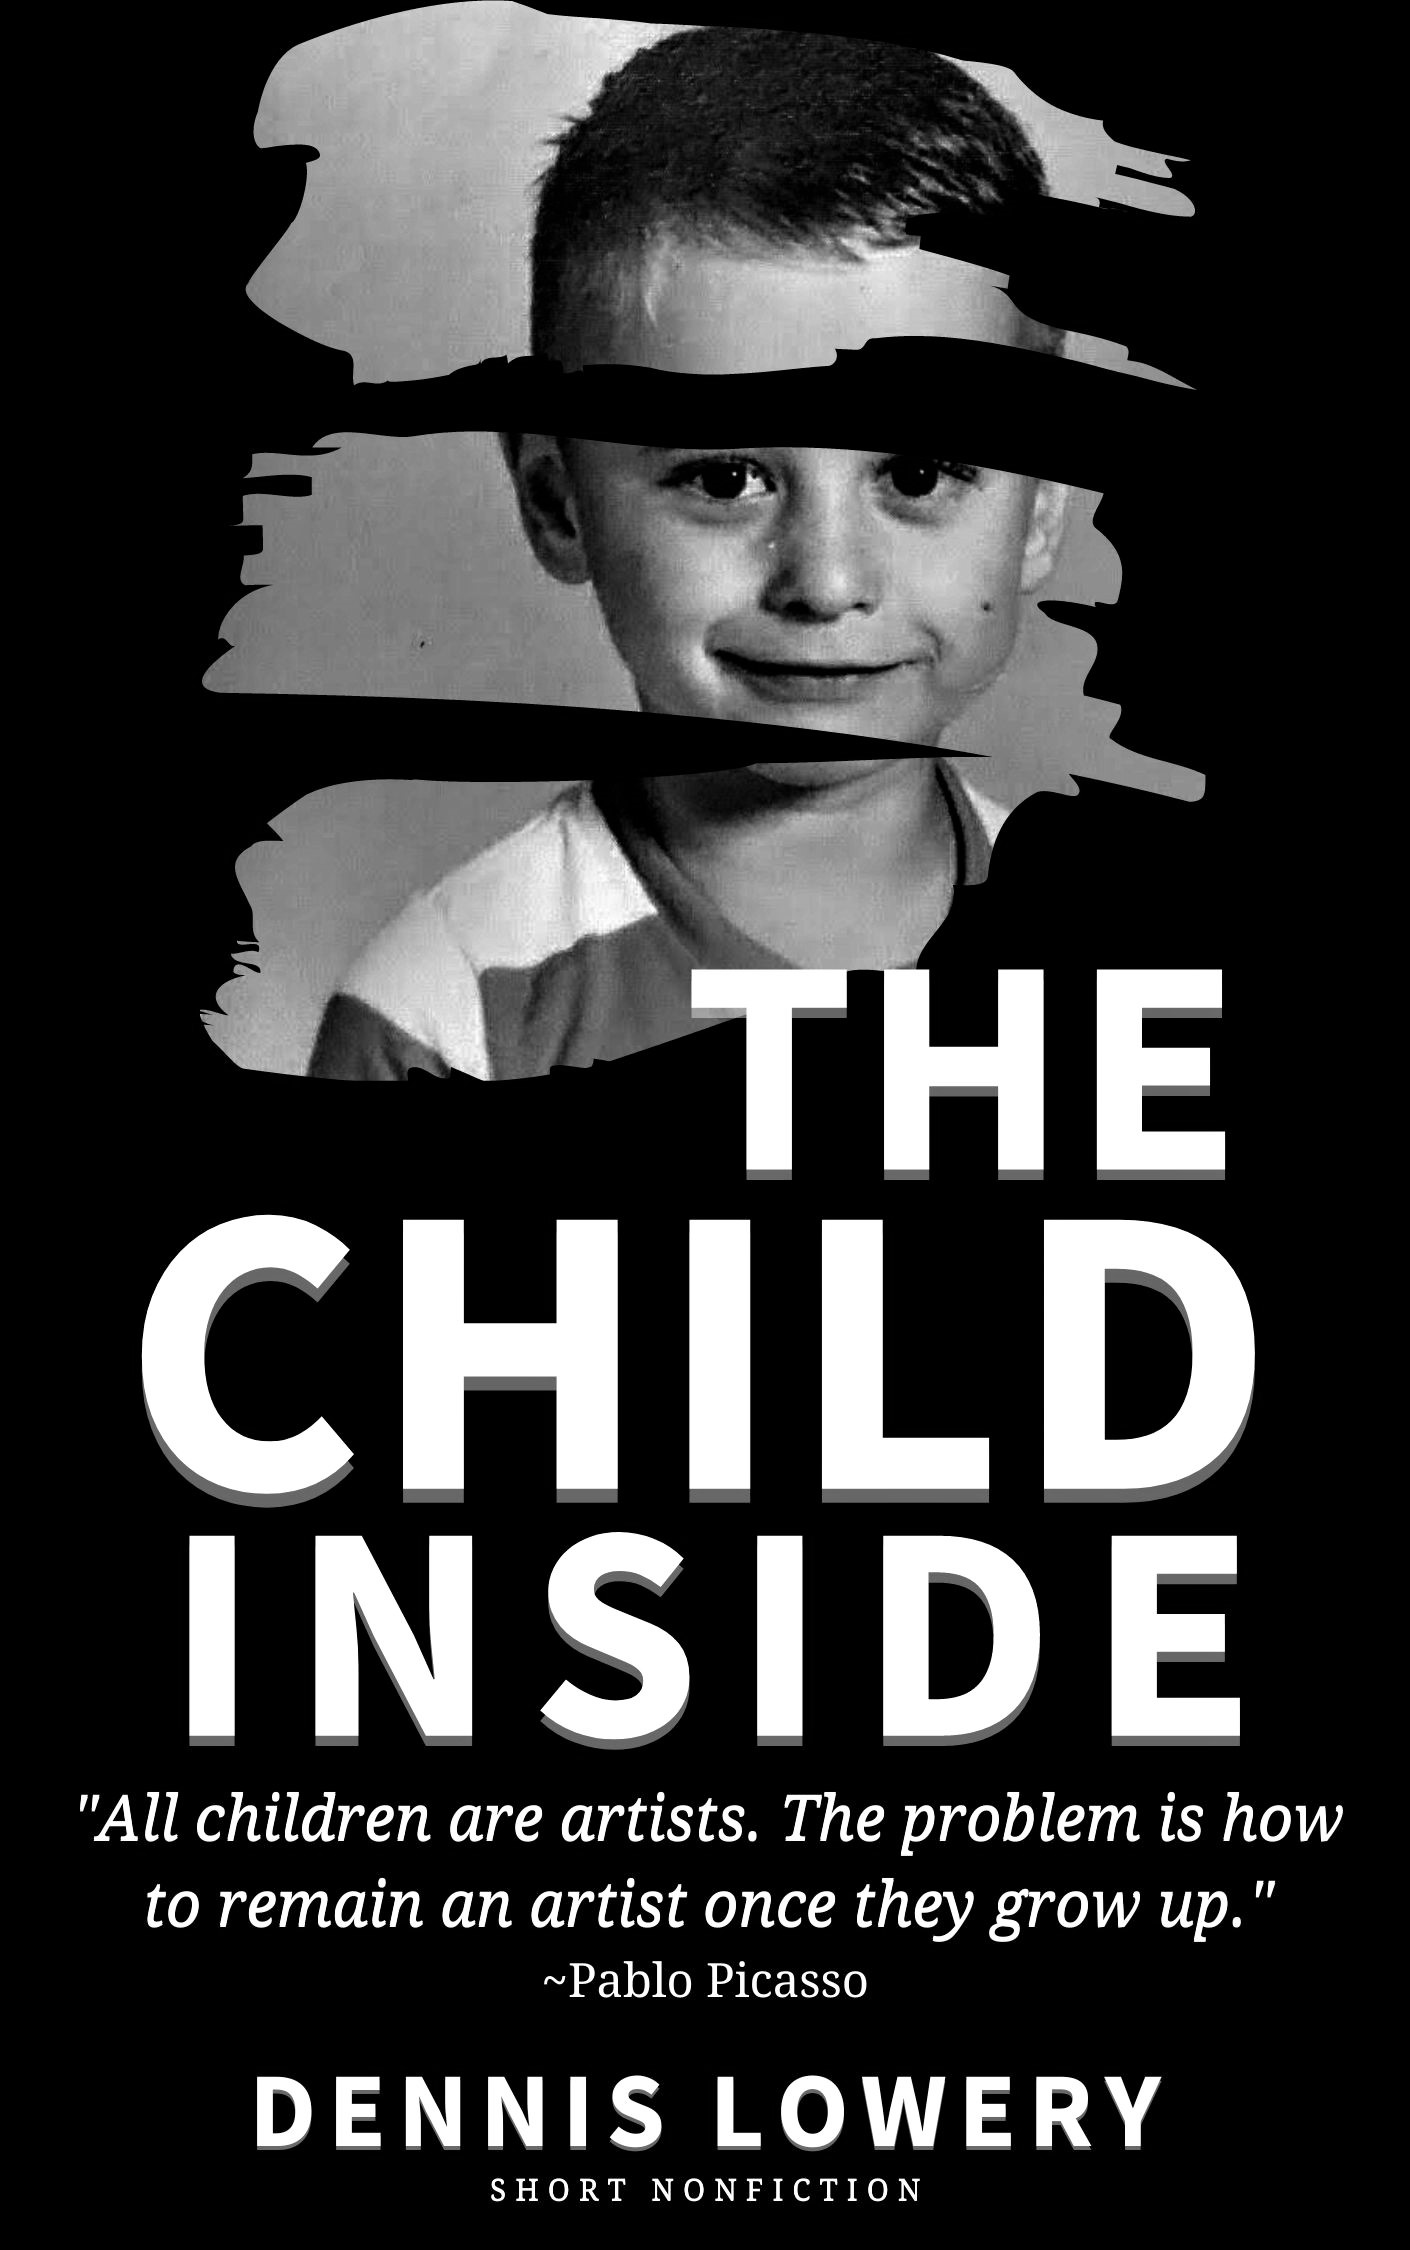 The Child Inside - Short Nonfiction by Dennis Lowery